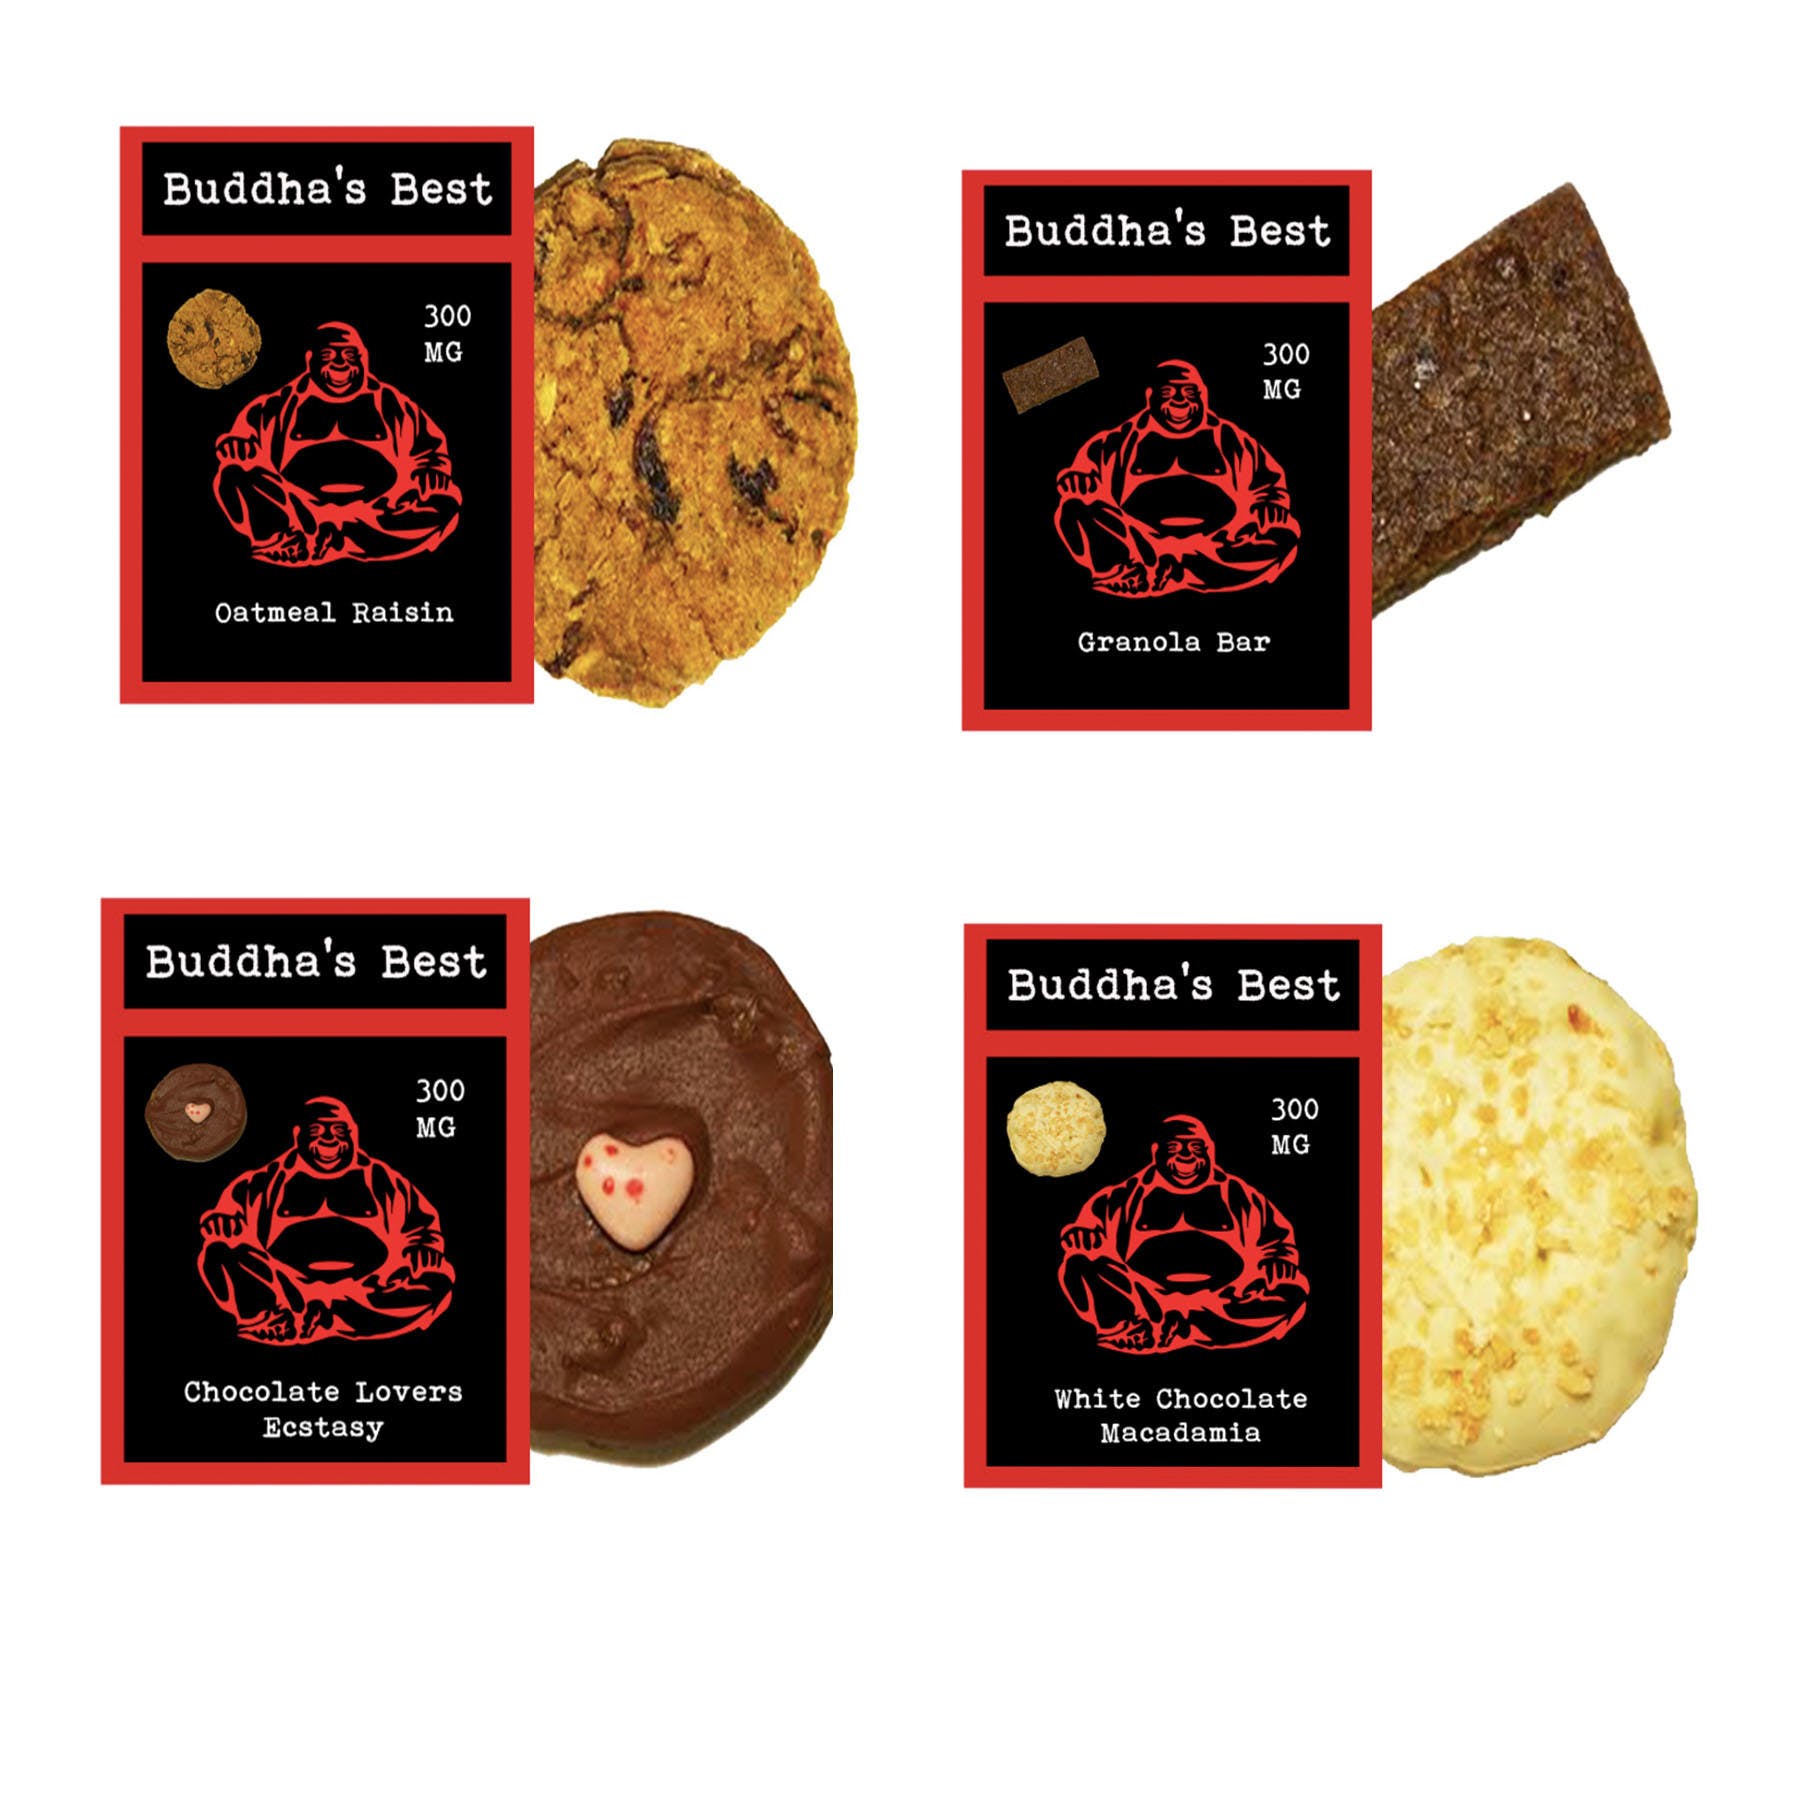 *Buddha's Best* Chocolate Lover's Ecstasy Cookie 300MG